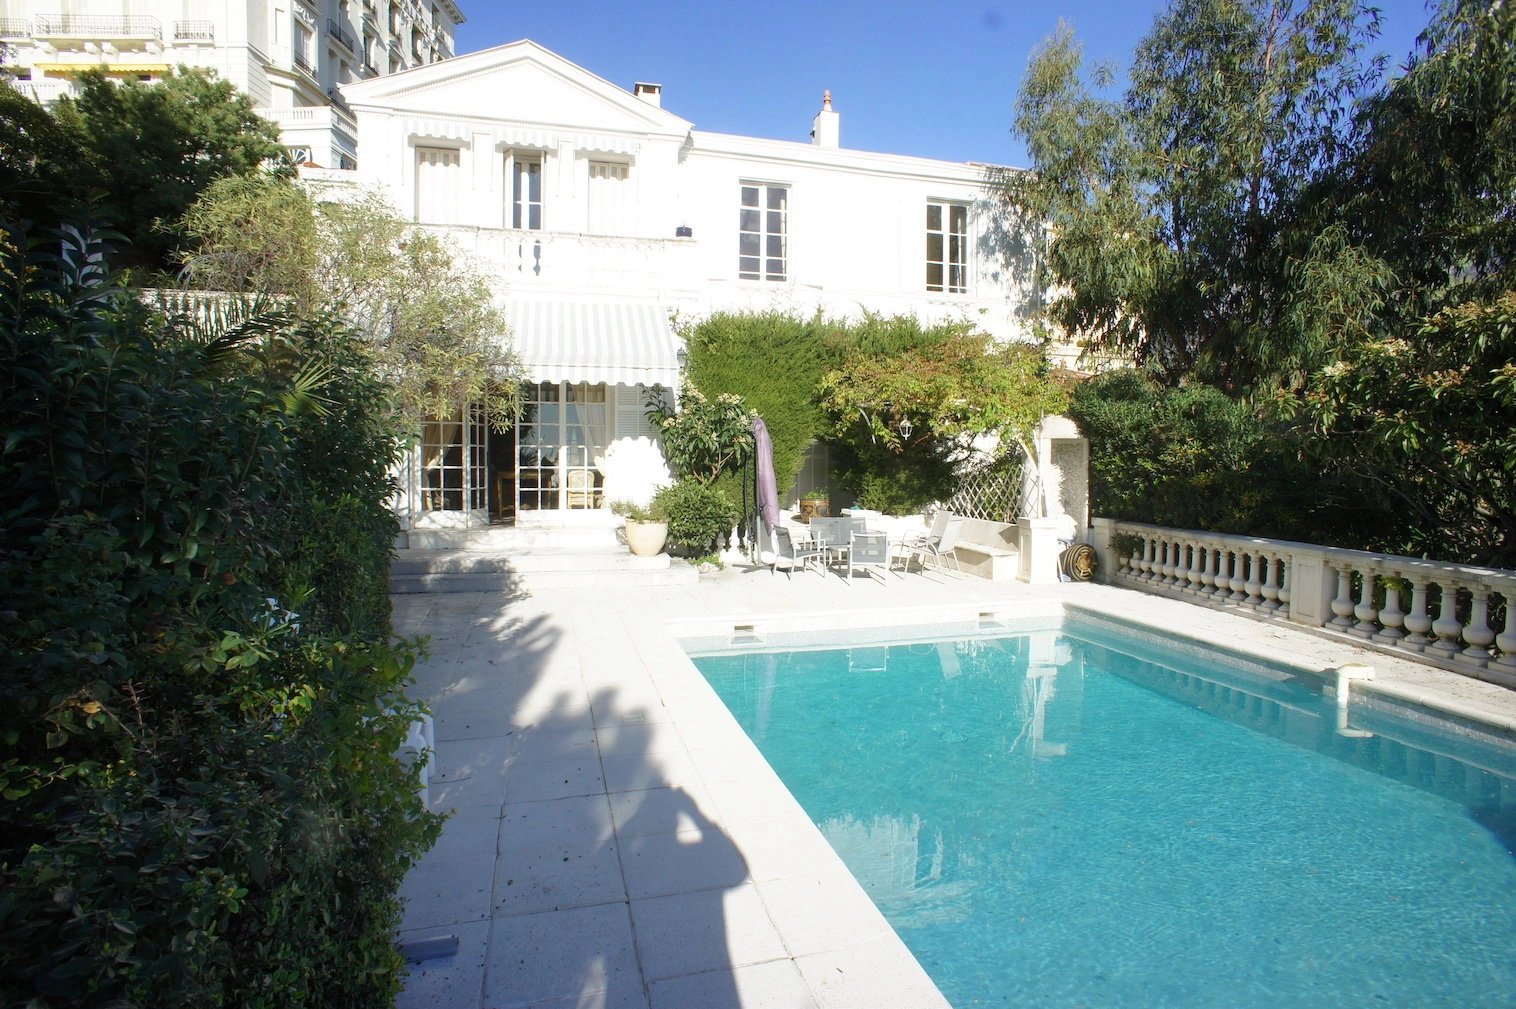 Belle Epoque villa with pool in the city of Menton